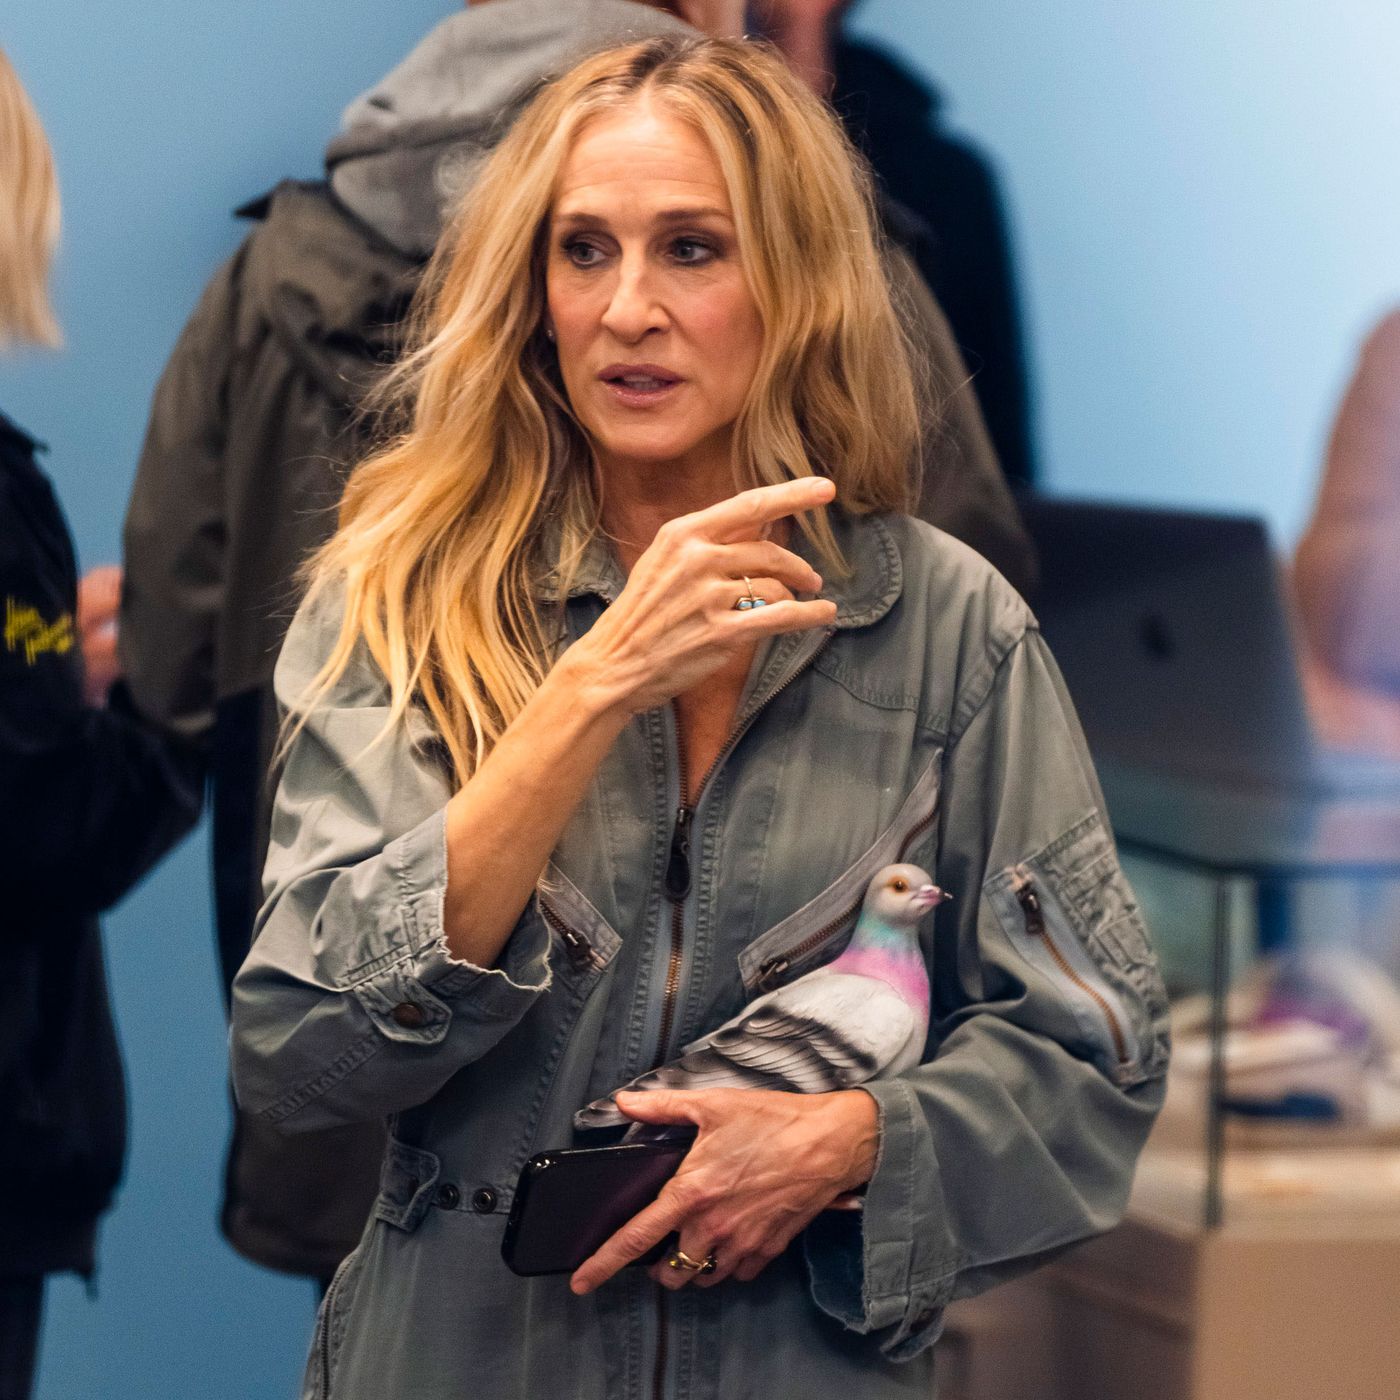 Sarah Jessica Parker Rocks a Pigeon Clutch and Head-to-Toe Pink on